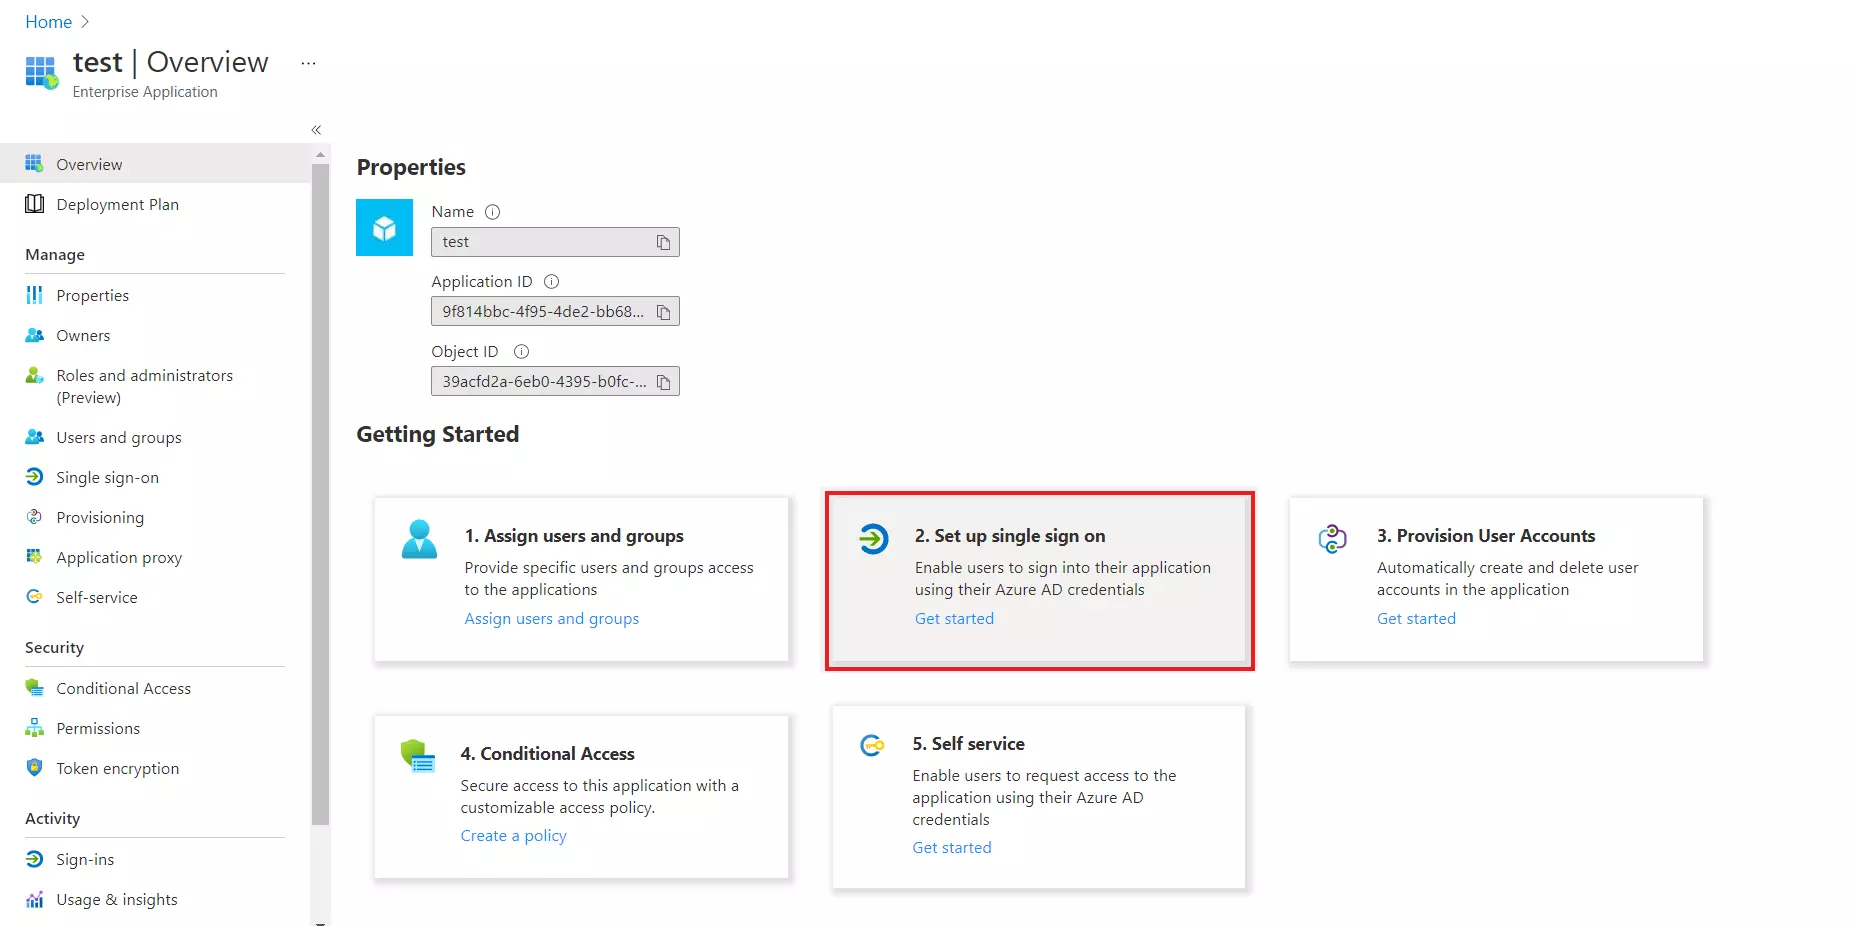 ASP.NET Core SAML Single Sign-On (SSO) using Azure AD (Microsoft Entra ID) as IDP -  Add Non-Gallery Application